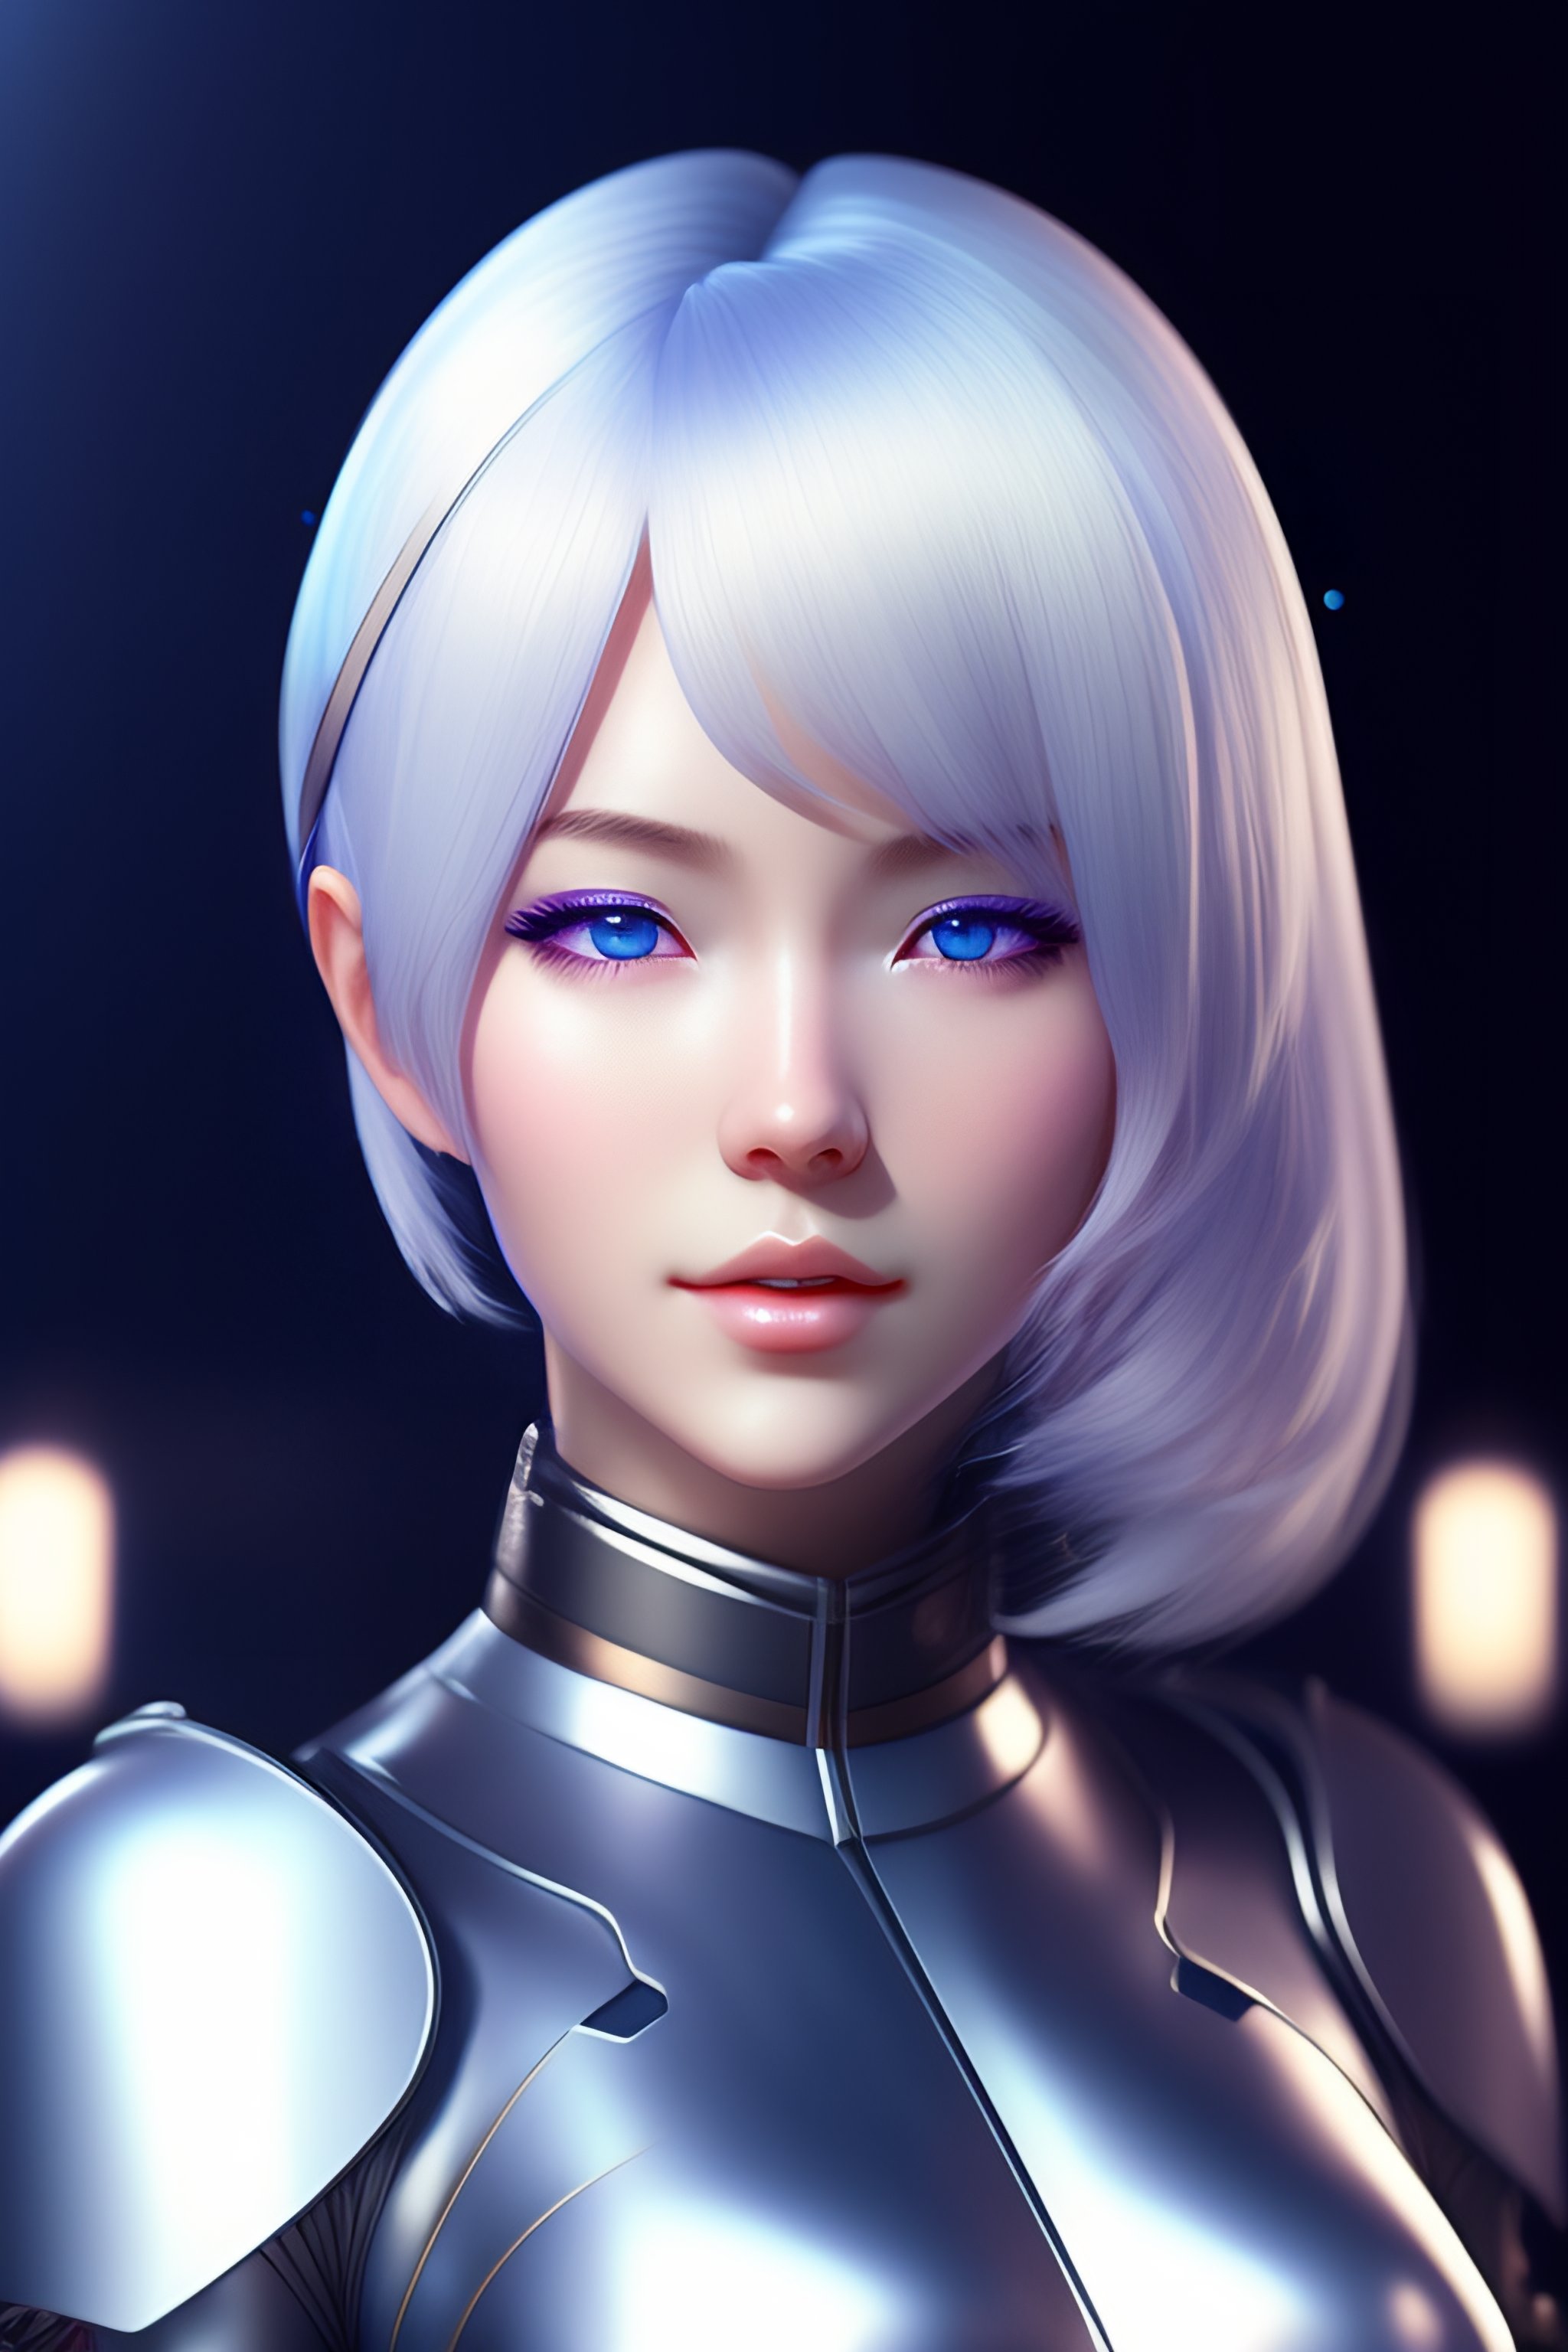 Lexica - Young adult anime android girl with silver hair, blue eyes ...